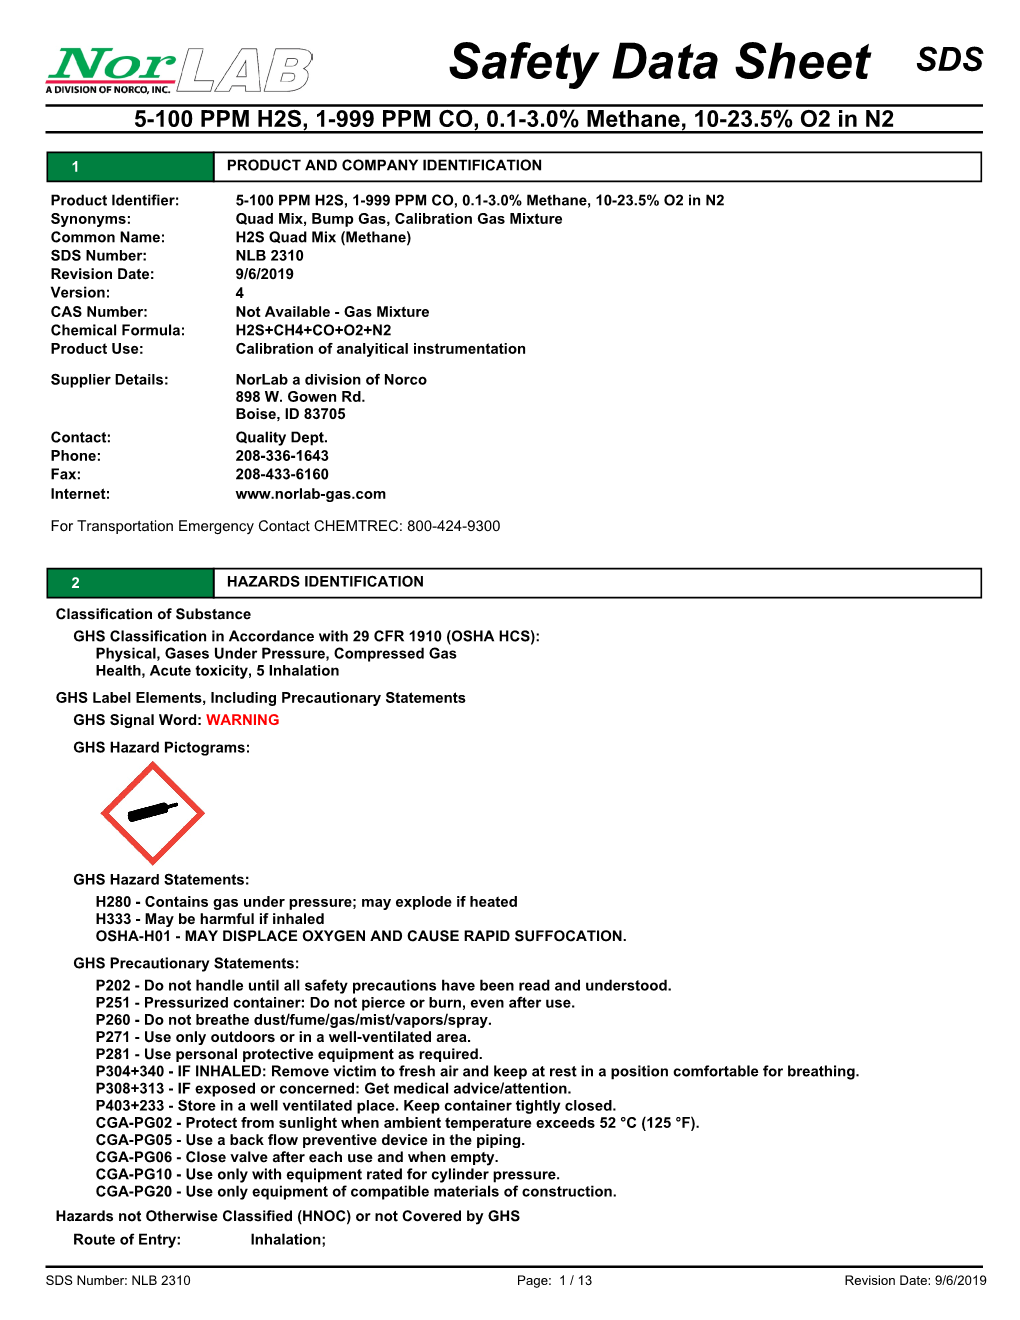 Safety Data Sheet SDS 5-100 PPM H2S, 1-999 PPM CO, 0.1-3.0% Methane, 10-23.5% O2 in N2